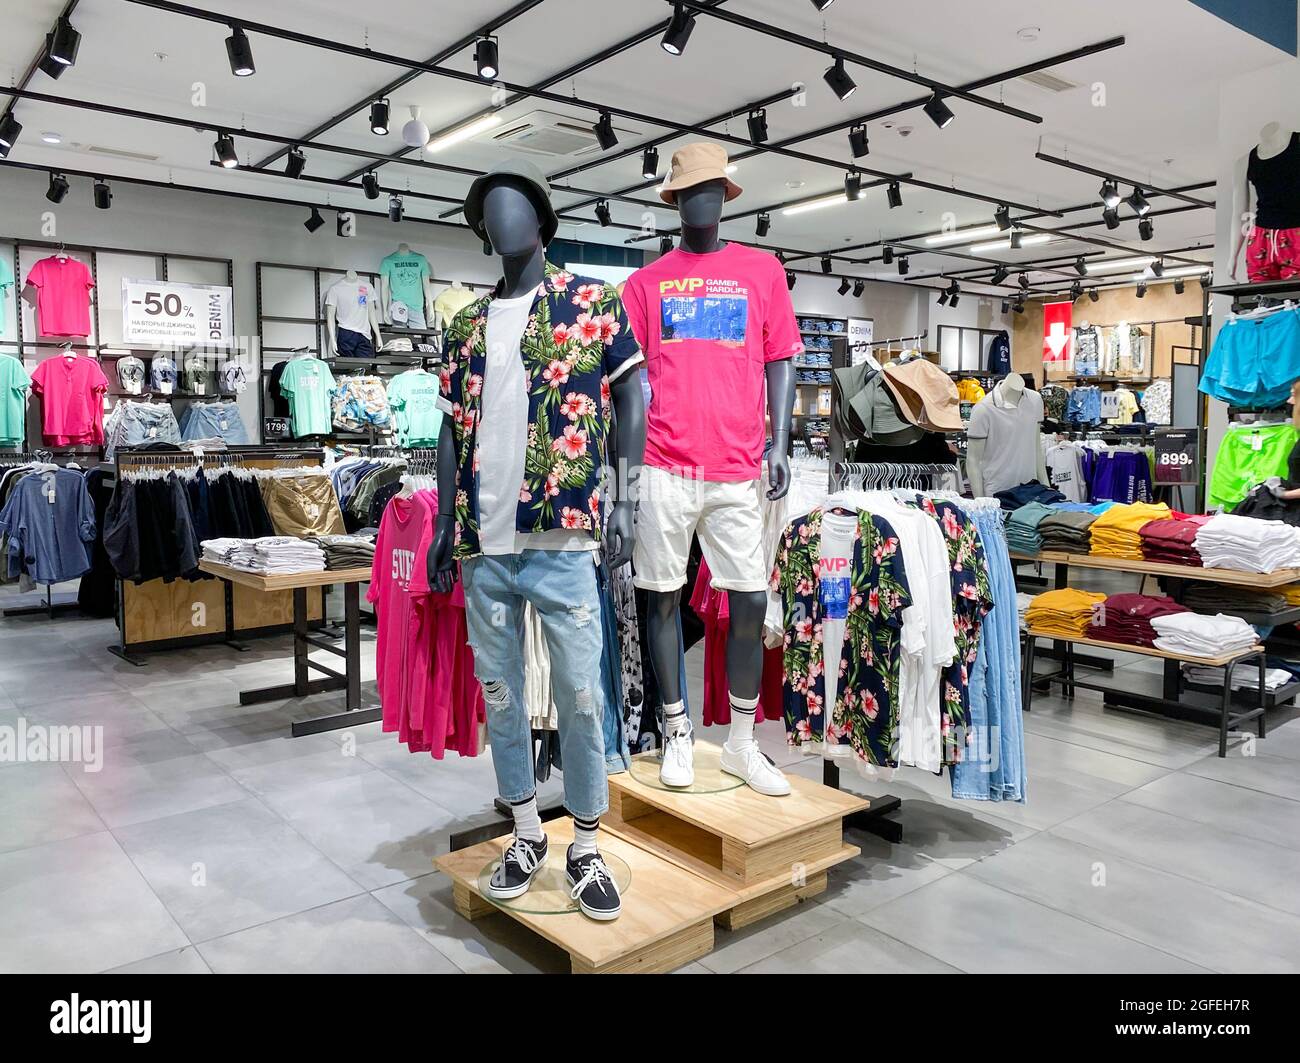 Moscow, Russia, June 2021: Men's Clothing Department. Two male mannequins in T-shirts, shorts, a Hawaiian shirt in the center of the store. Shelves wi Stock Photo